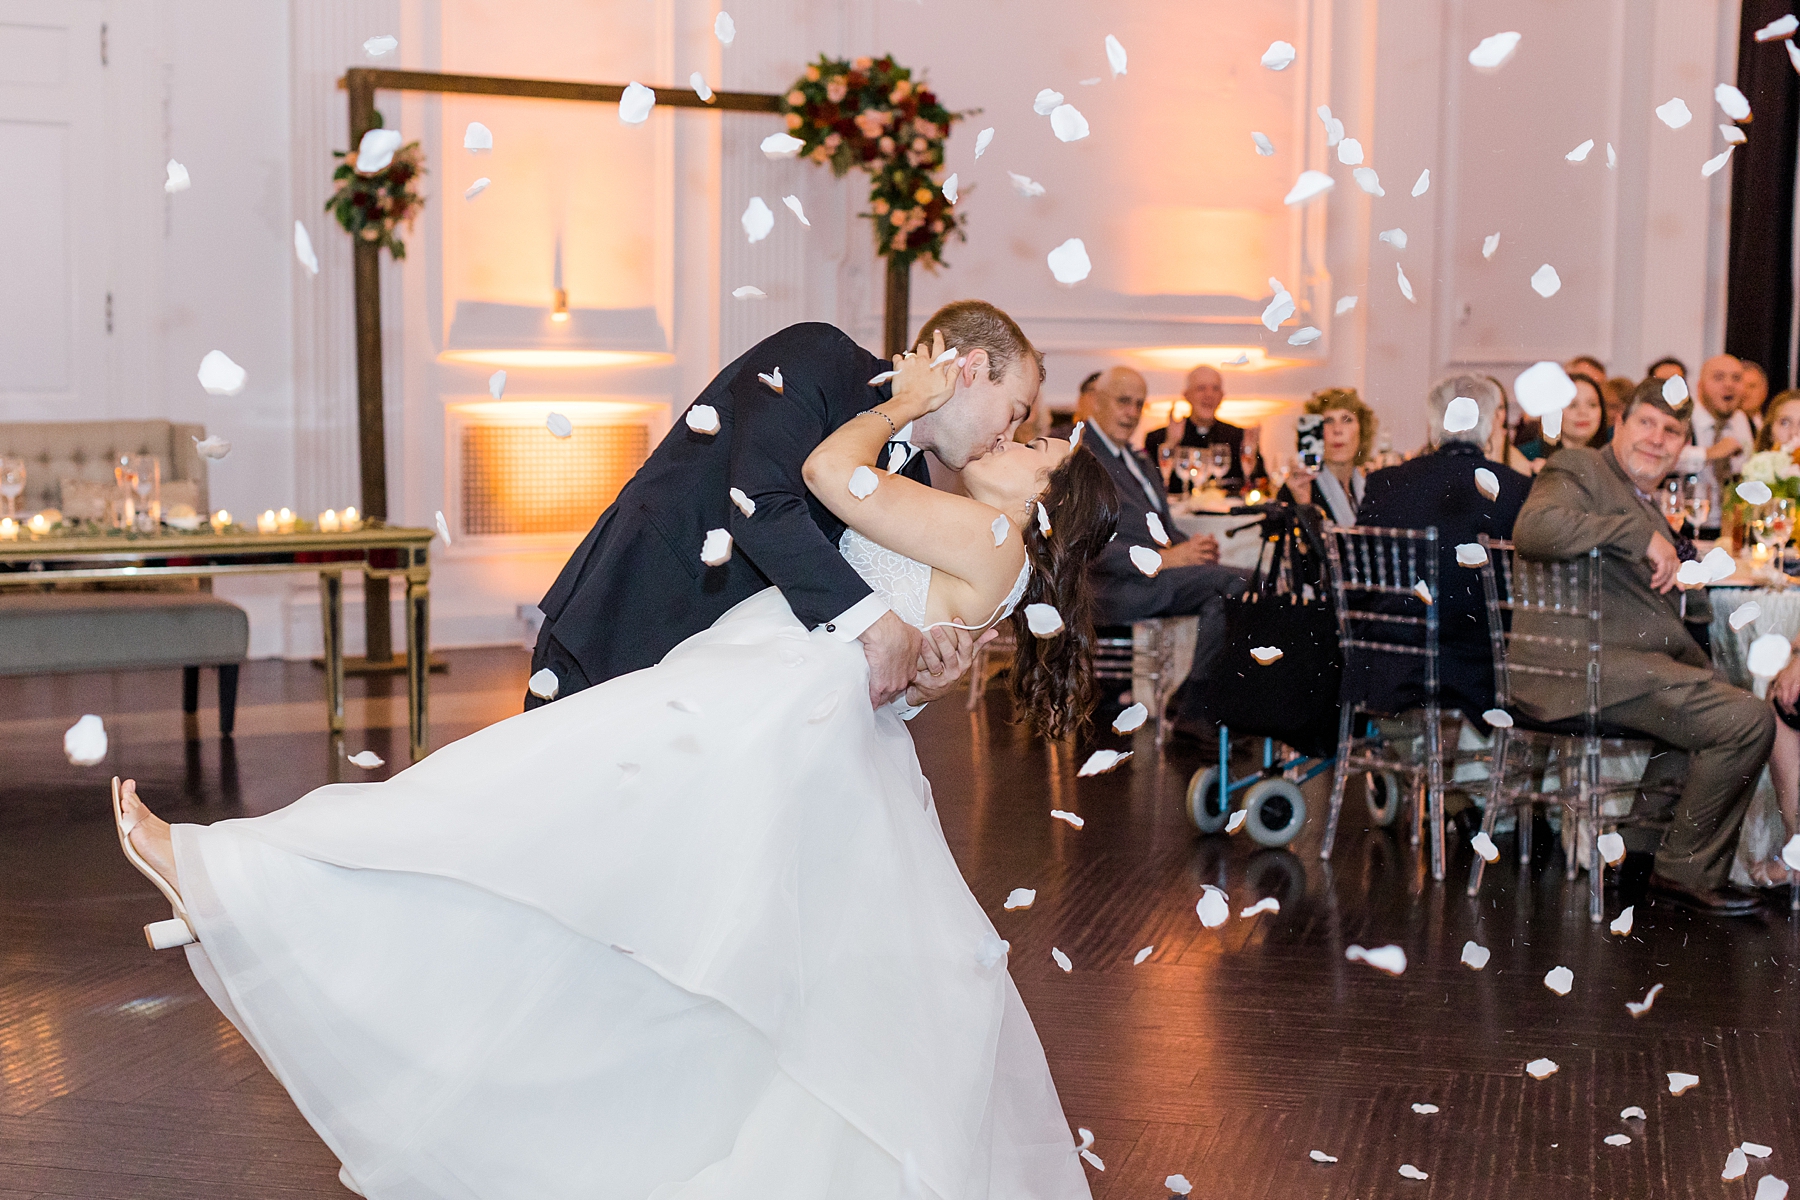 newlyweds kiss on the dance floor surrounded by flower petals